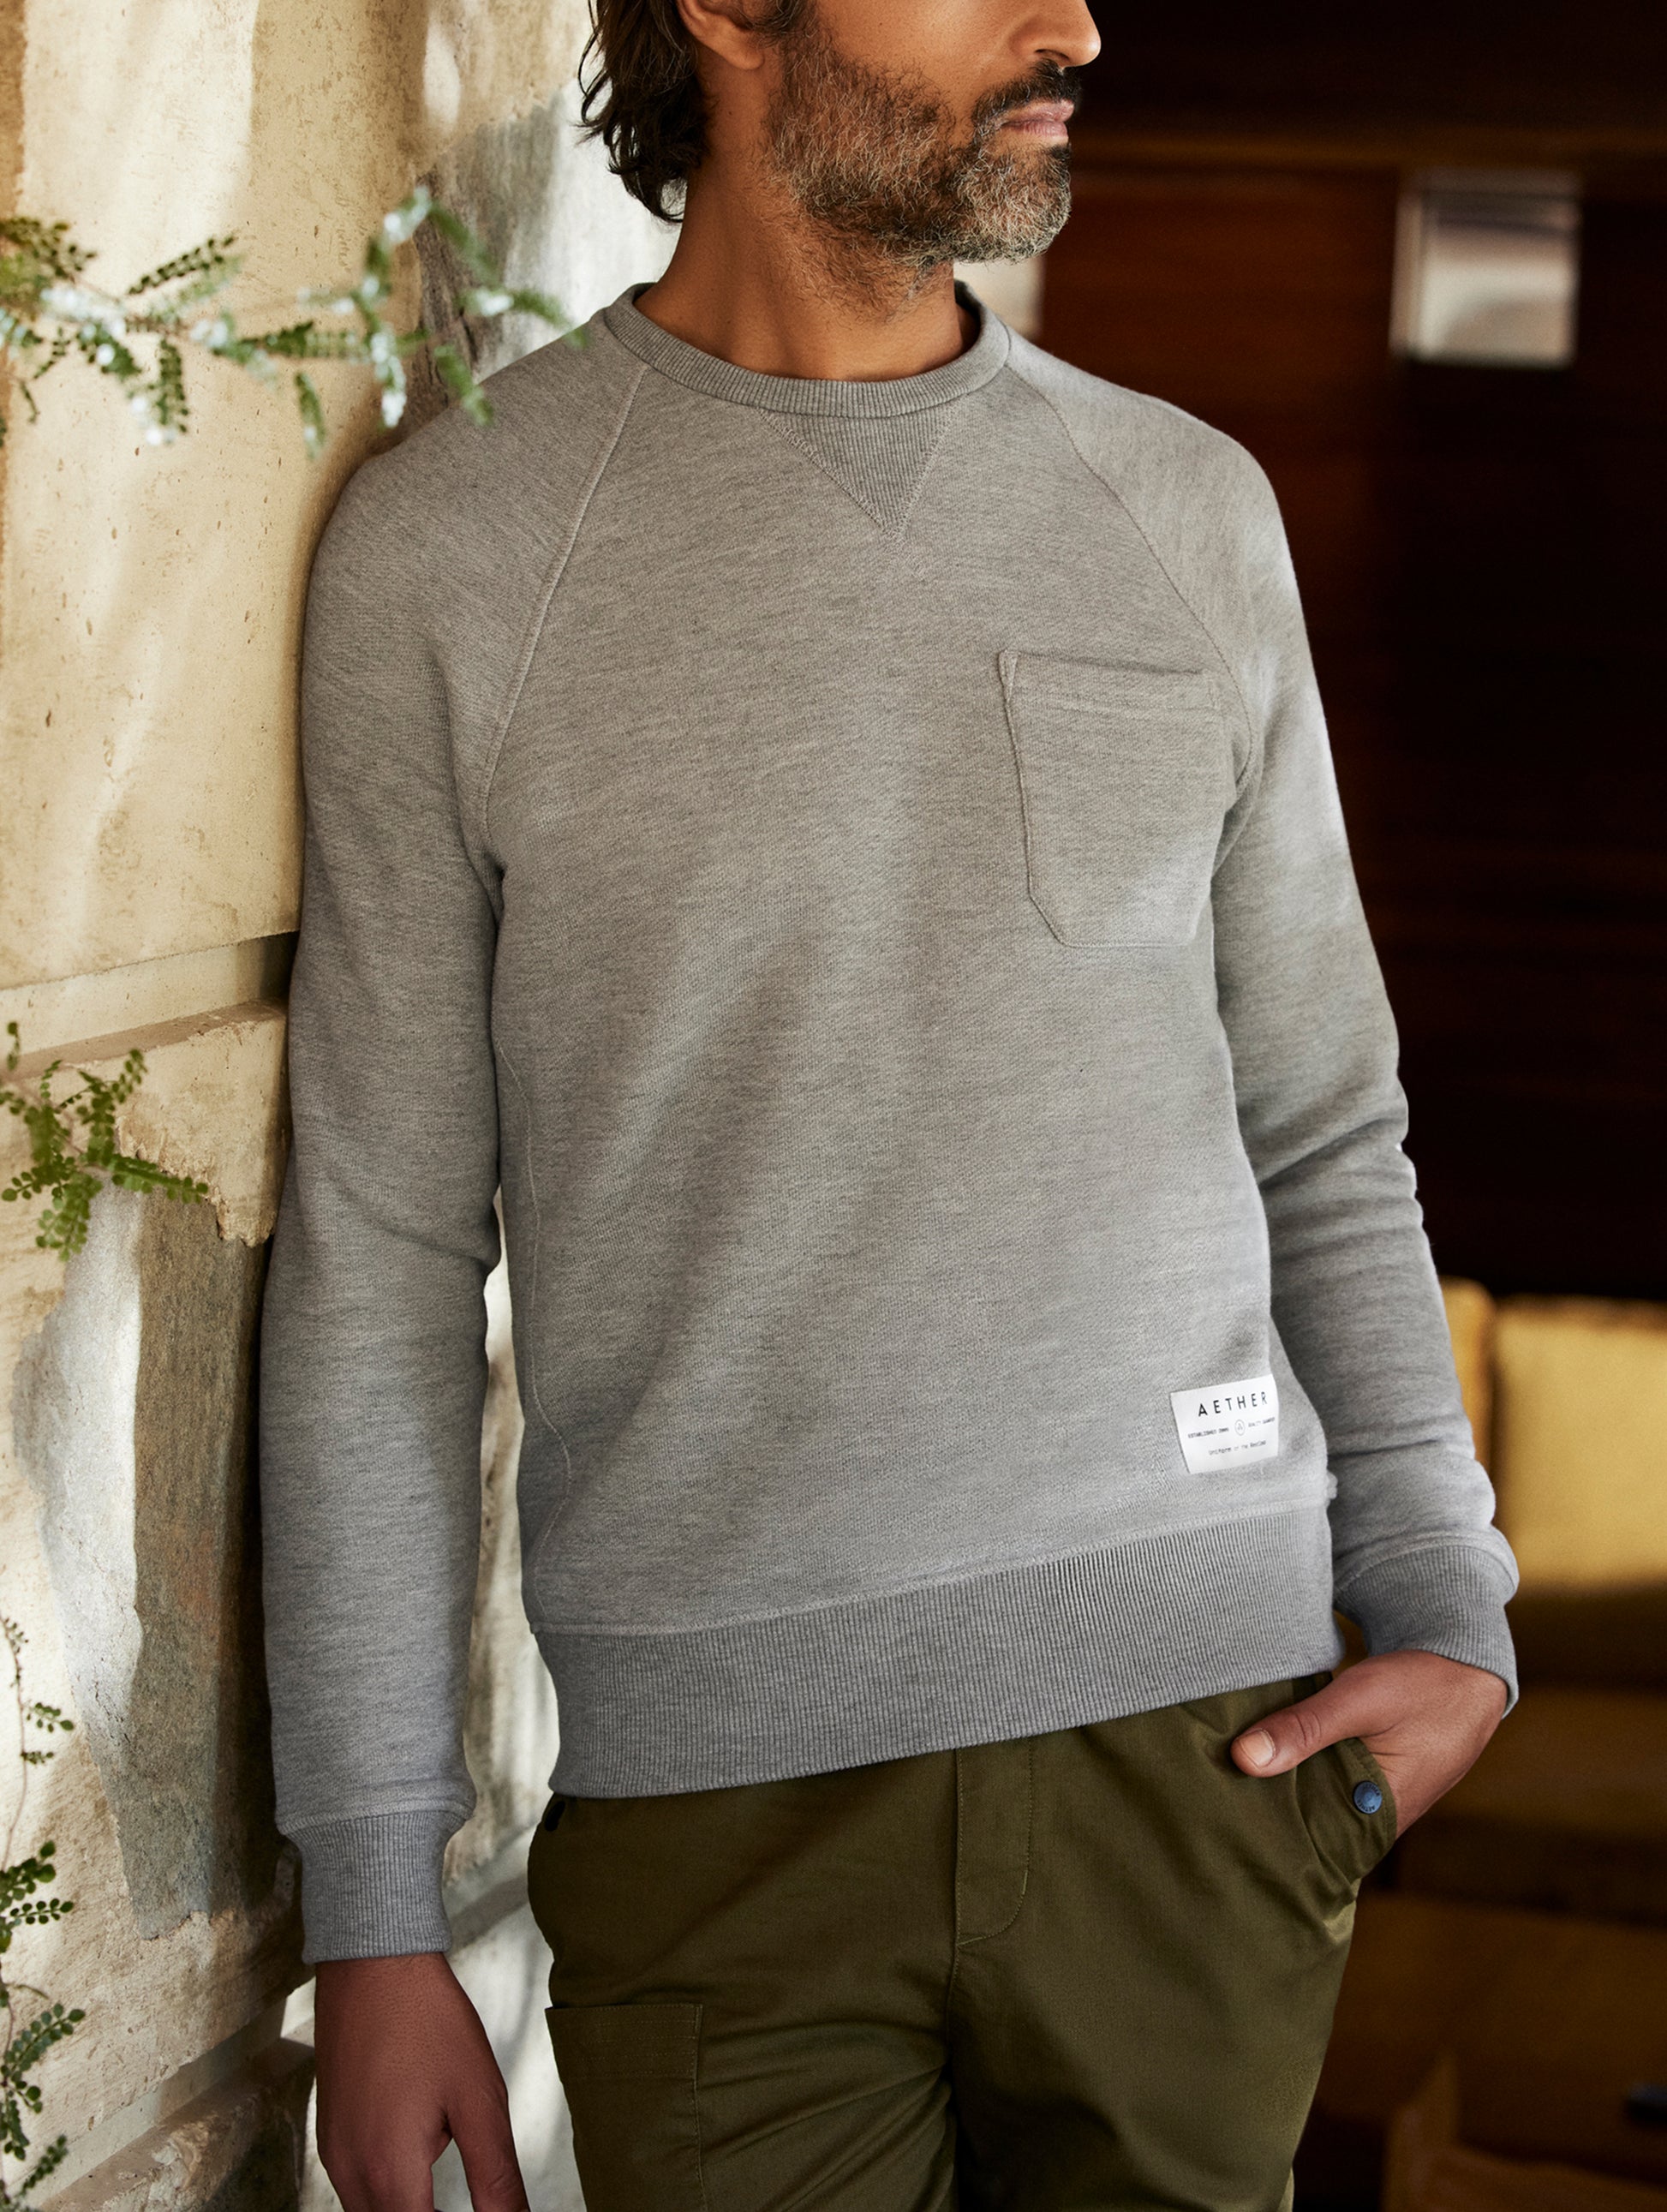 man wearing a grey crew neck with pocket